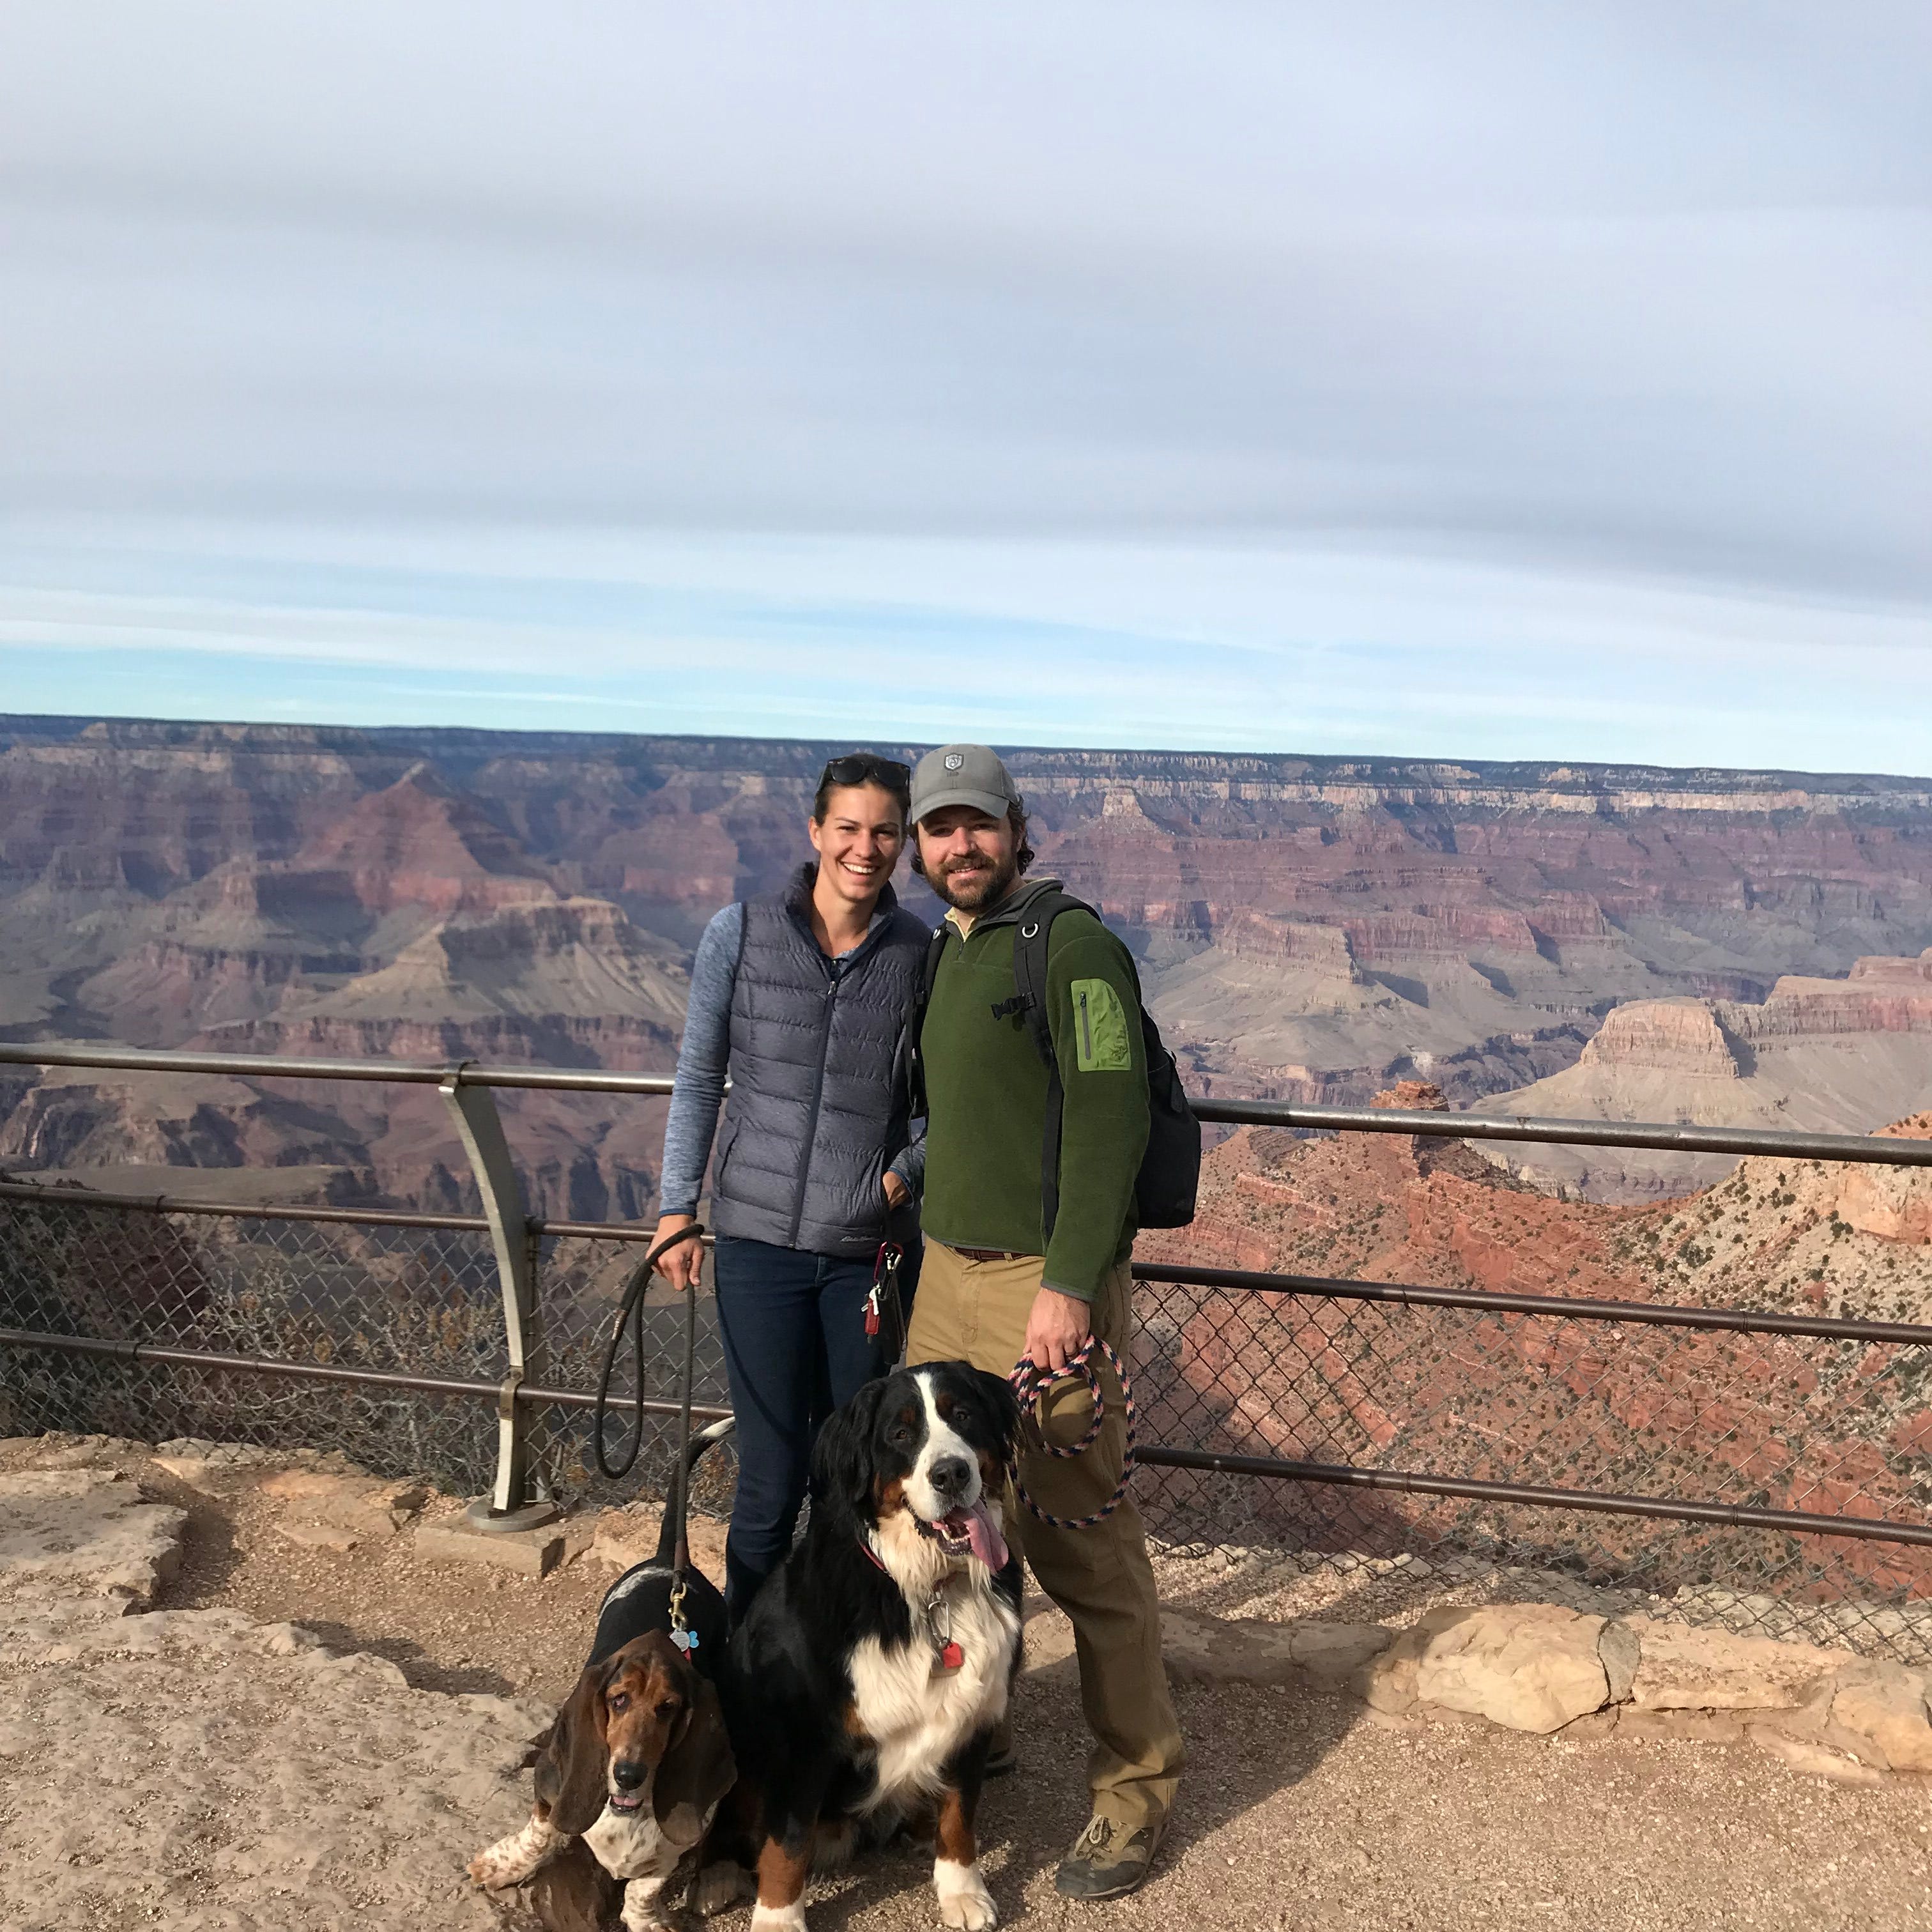 Adam Kendall and Kate Leese, husband and wife, with their two dogs Frank and Baker, (seen here at the Grand Canyon), have been traveling the country since August of 2016 while running their consulting company before starting Antho Vineyards.